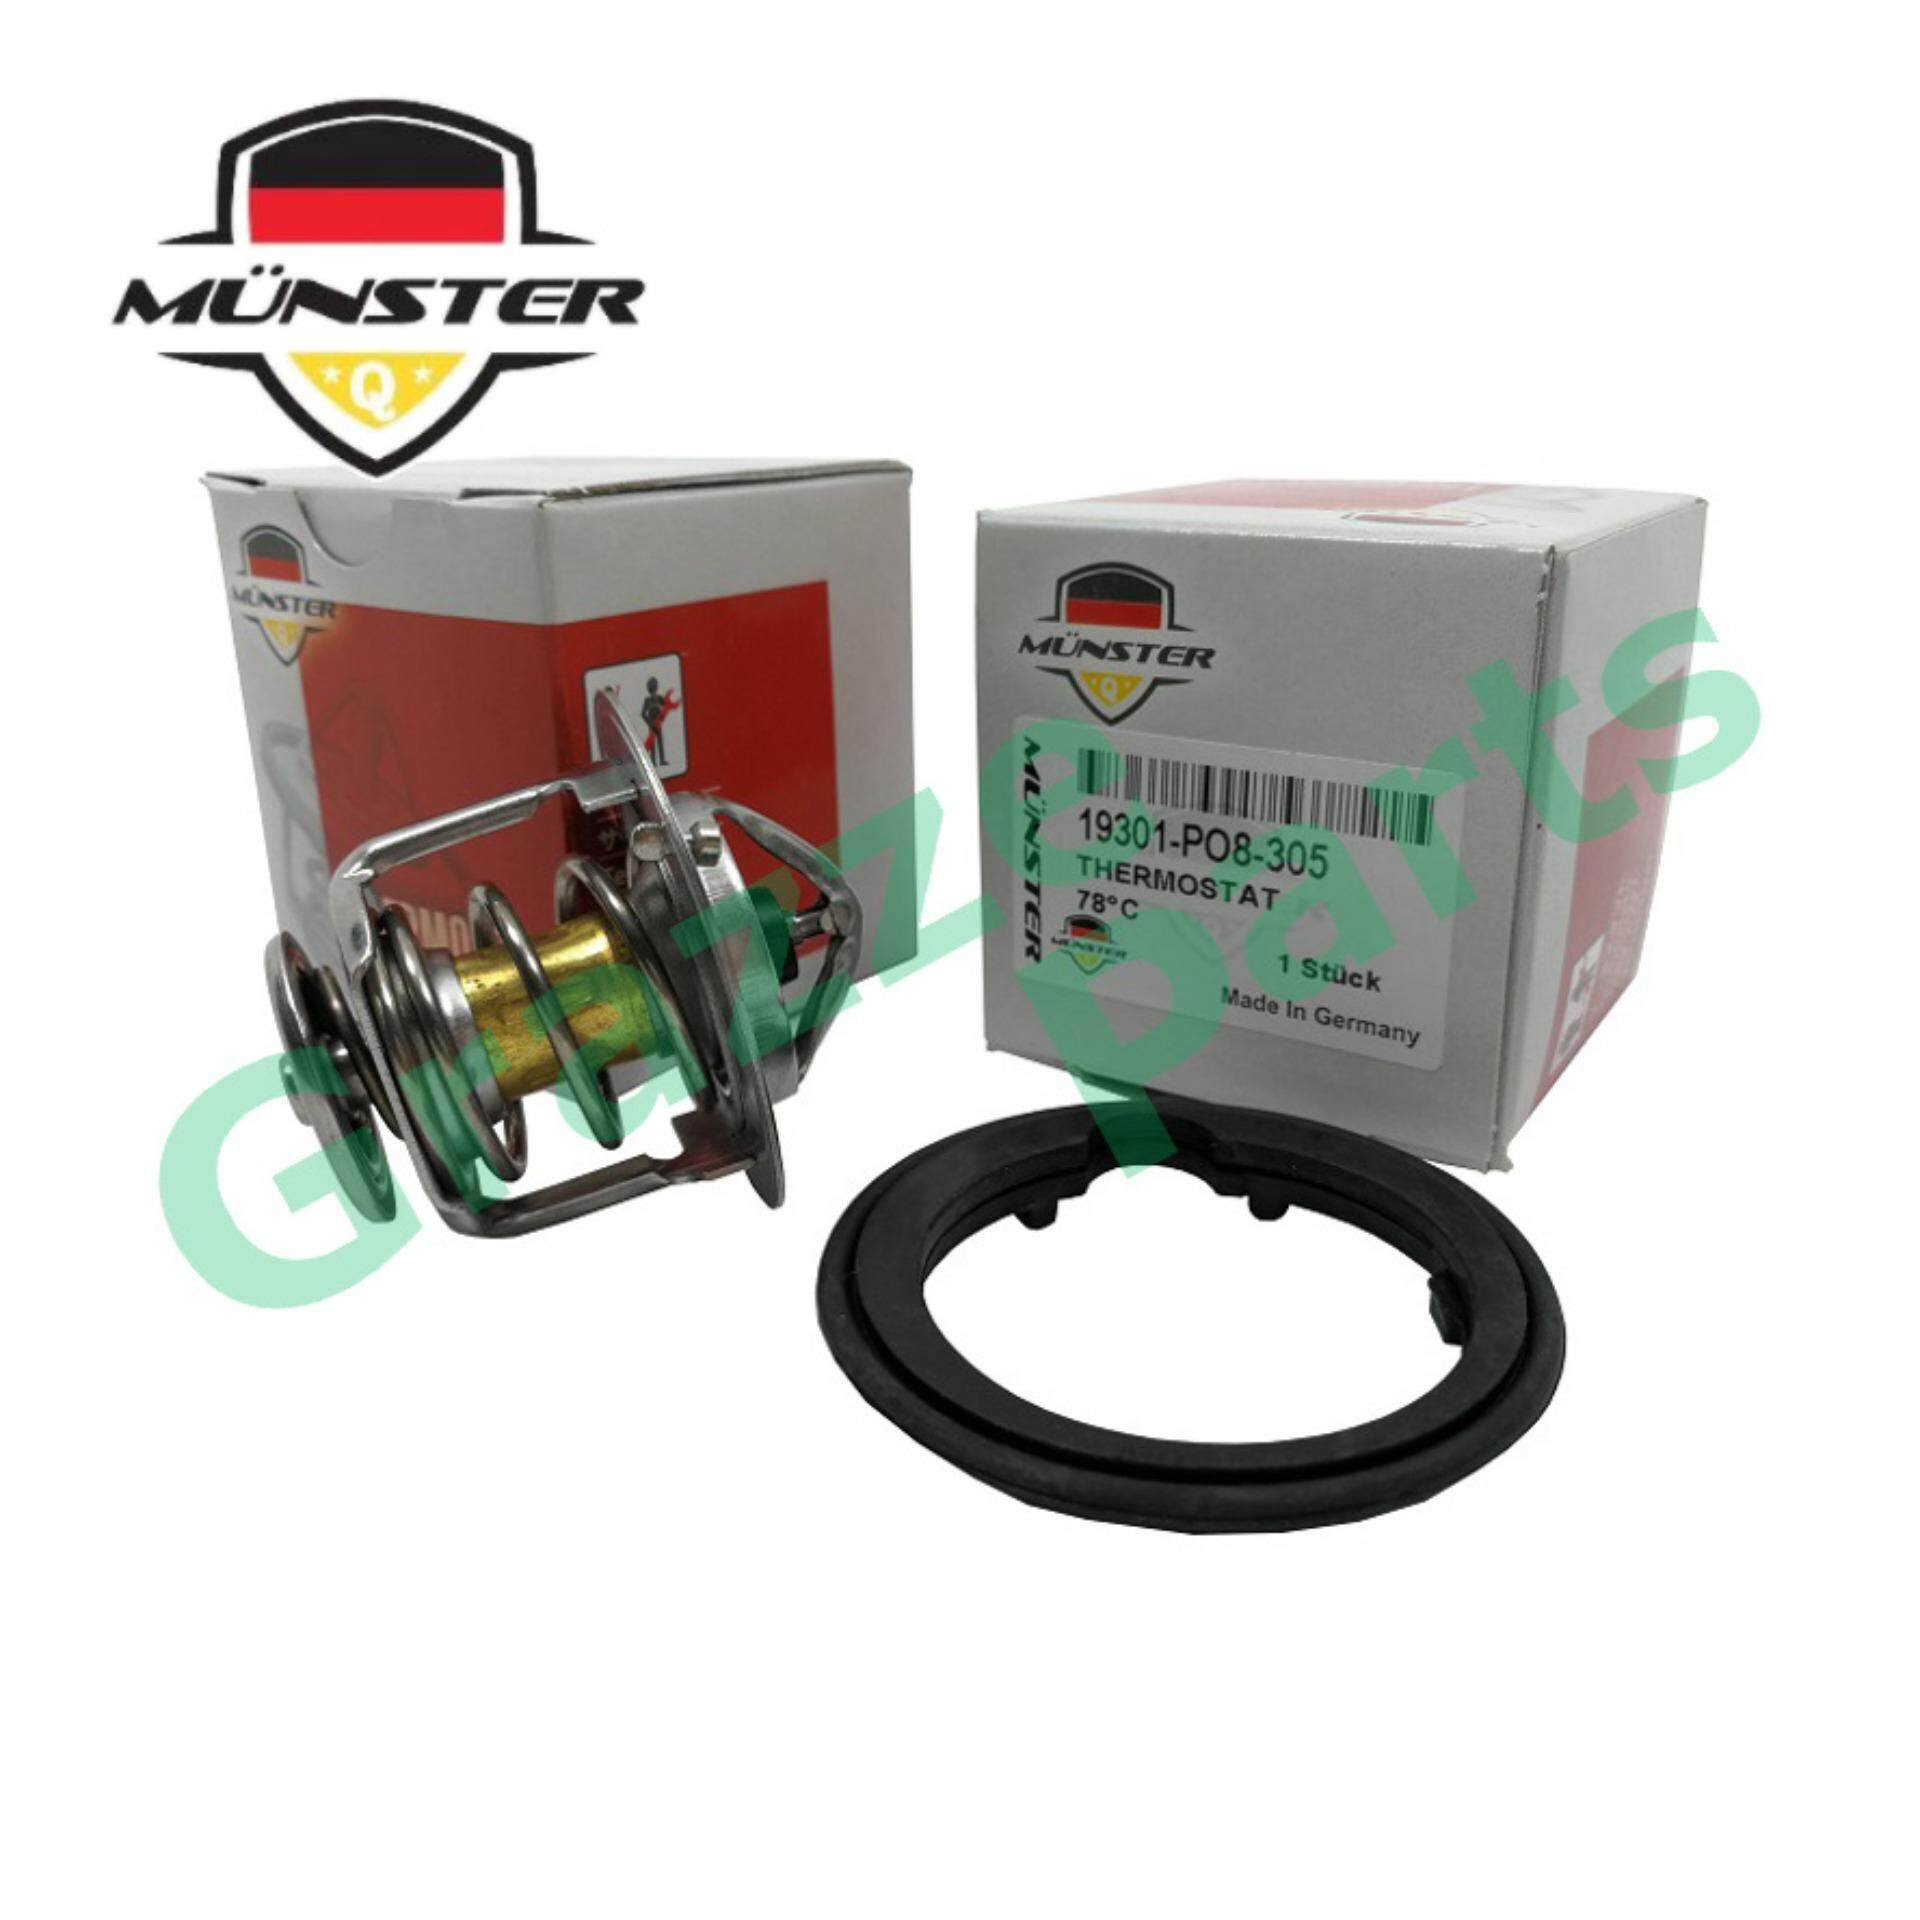 Münster Coolant Thermostat + Sealing Ring for 19301-PO8-305 Honda Accord SM4 SV4 S84 City SEL TMO Civic SR4 SO4 SNA 1.8 B16A